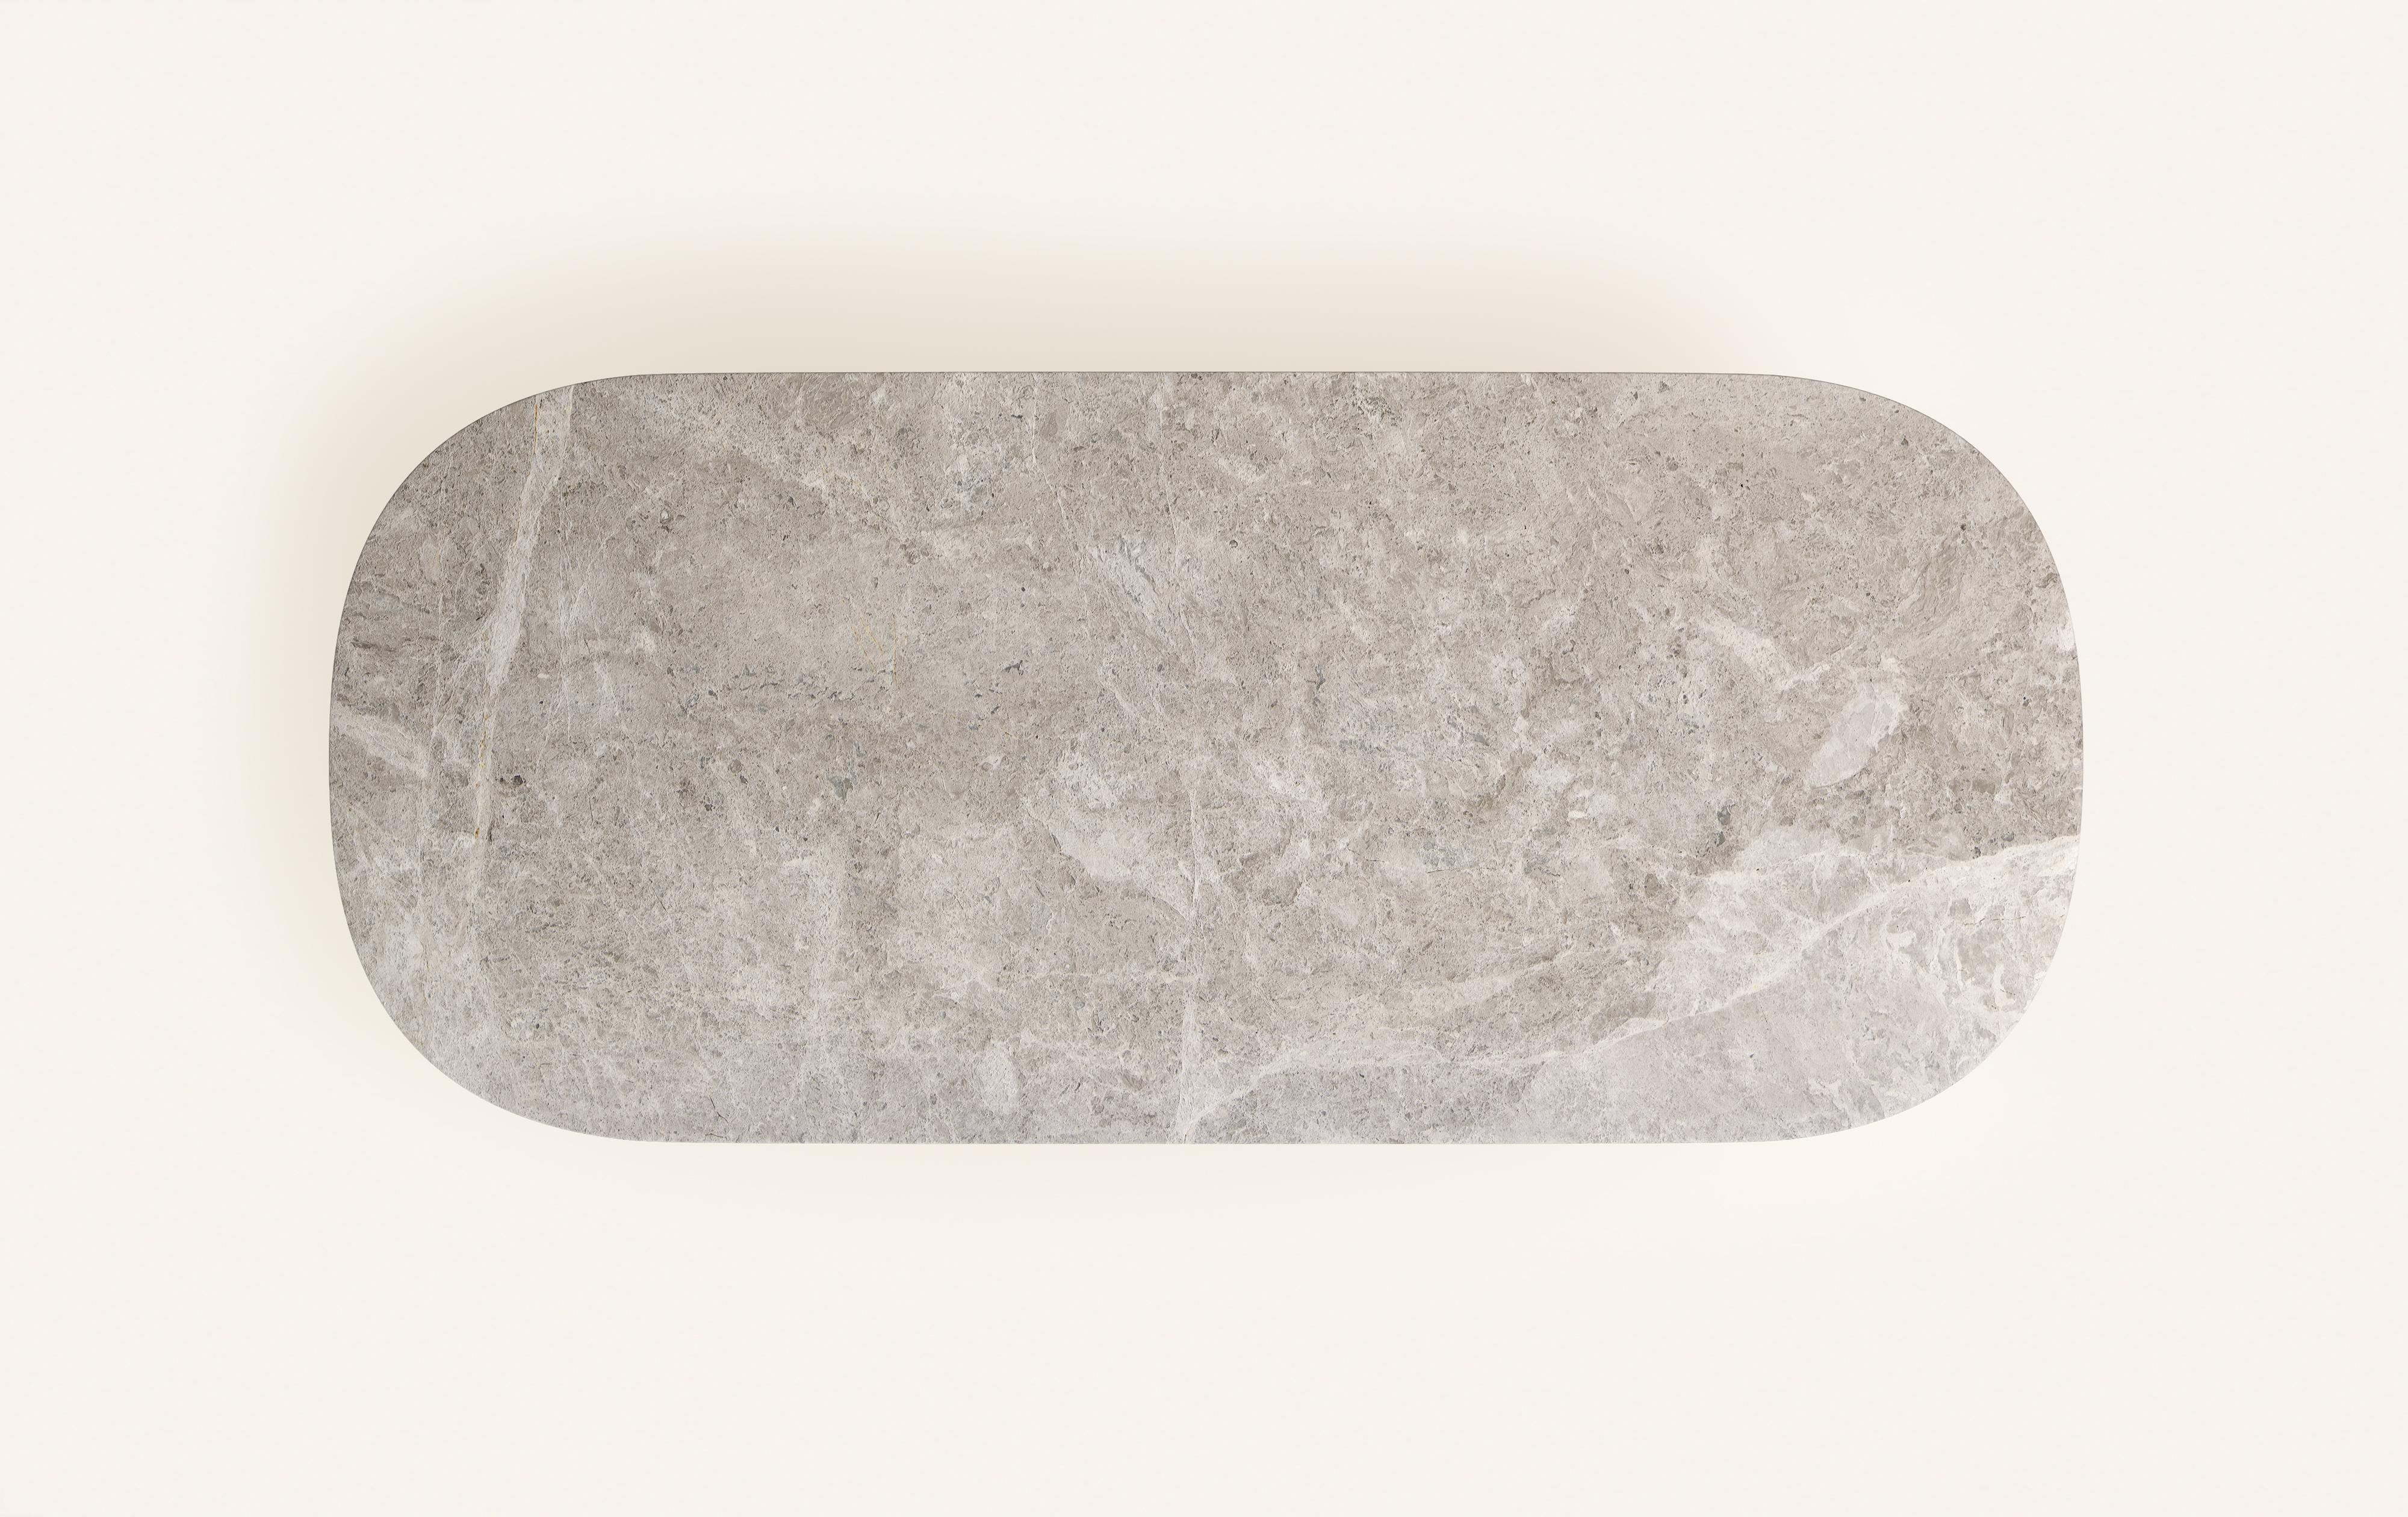 FORM(LA) Cono Oval Dining Table 108”L x 48”W x 30”H Tundra Gray Marble In New Condition For Sale In Los Angeles, CA